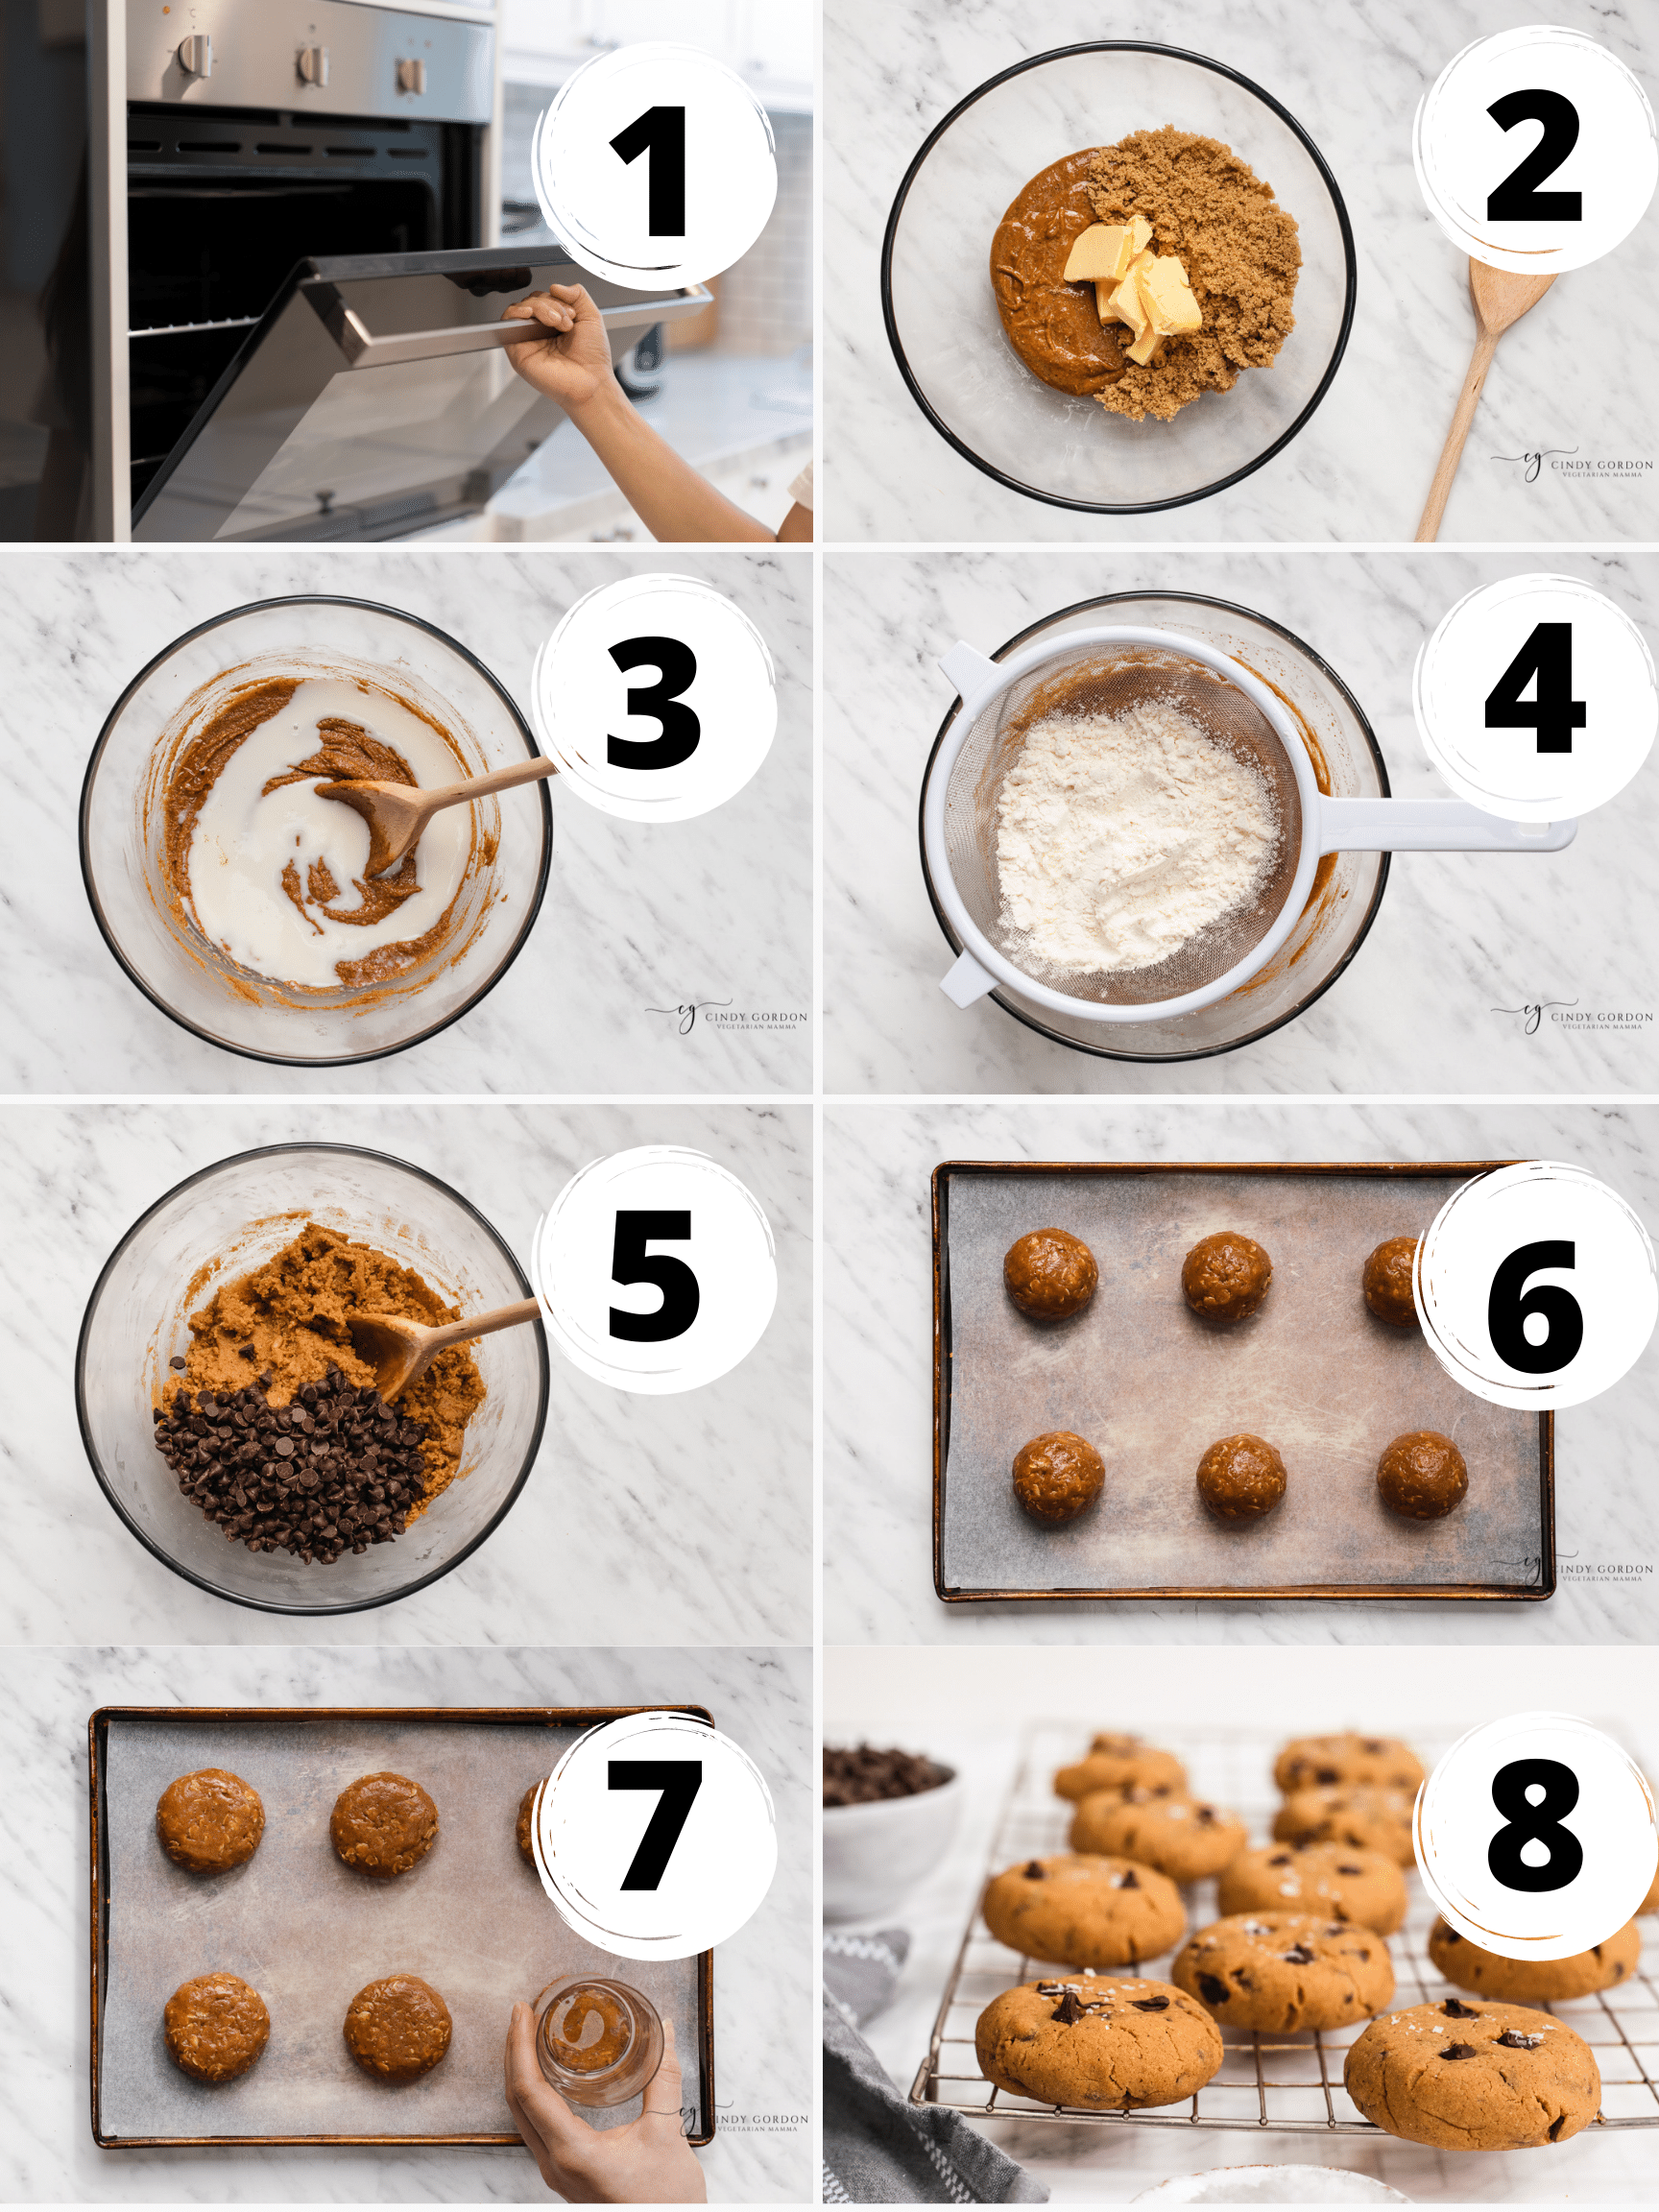 A collage of 8 steps to make fluffy vegan peanut butter cookies with chocolate chips